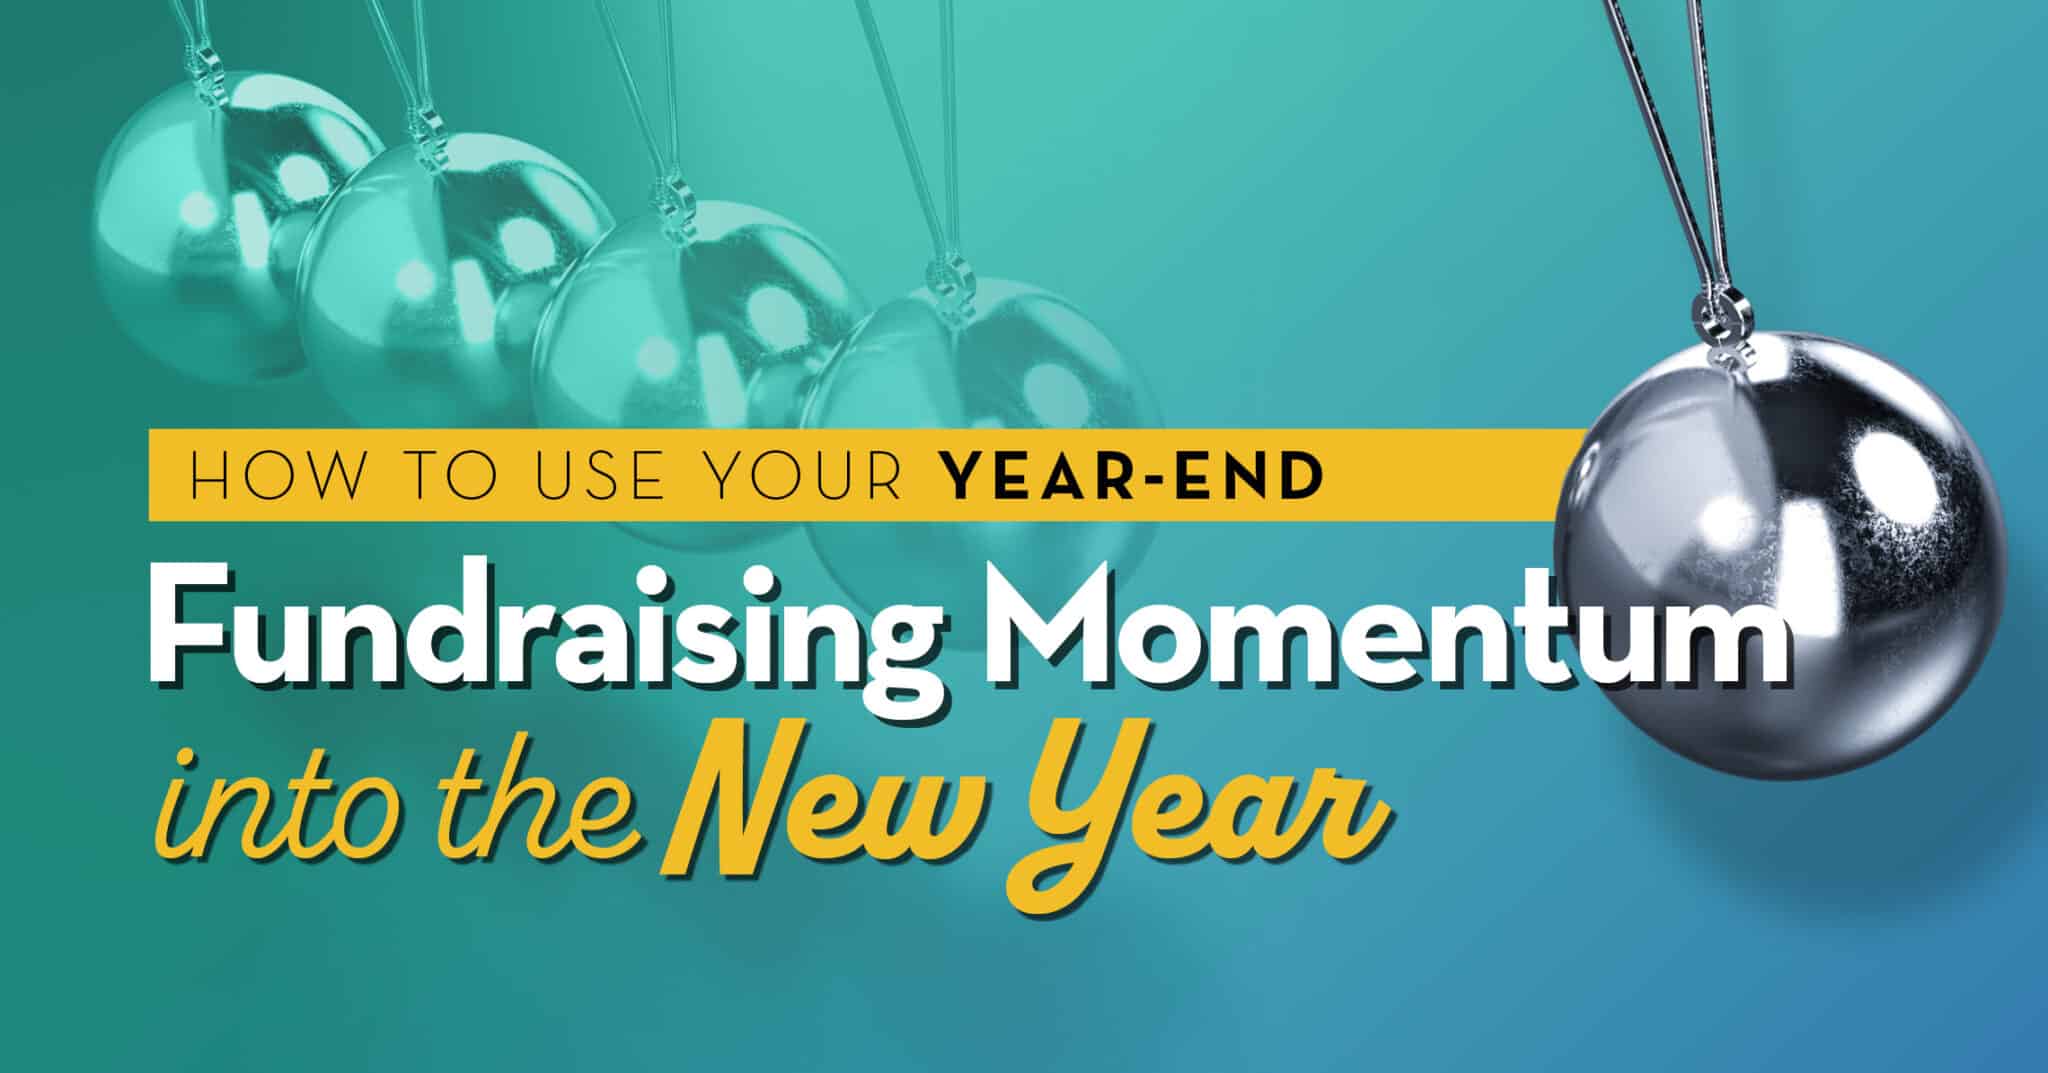 How to Use Your Year End Fundraising Momentum into the New Year